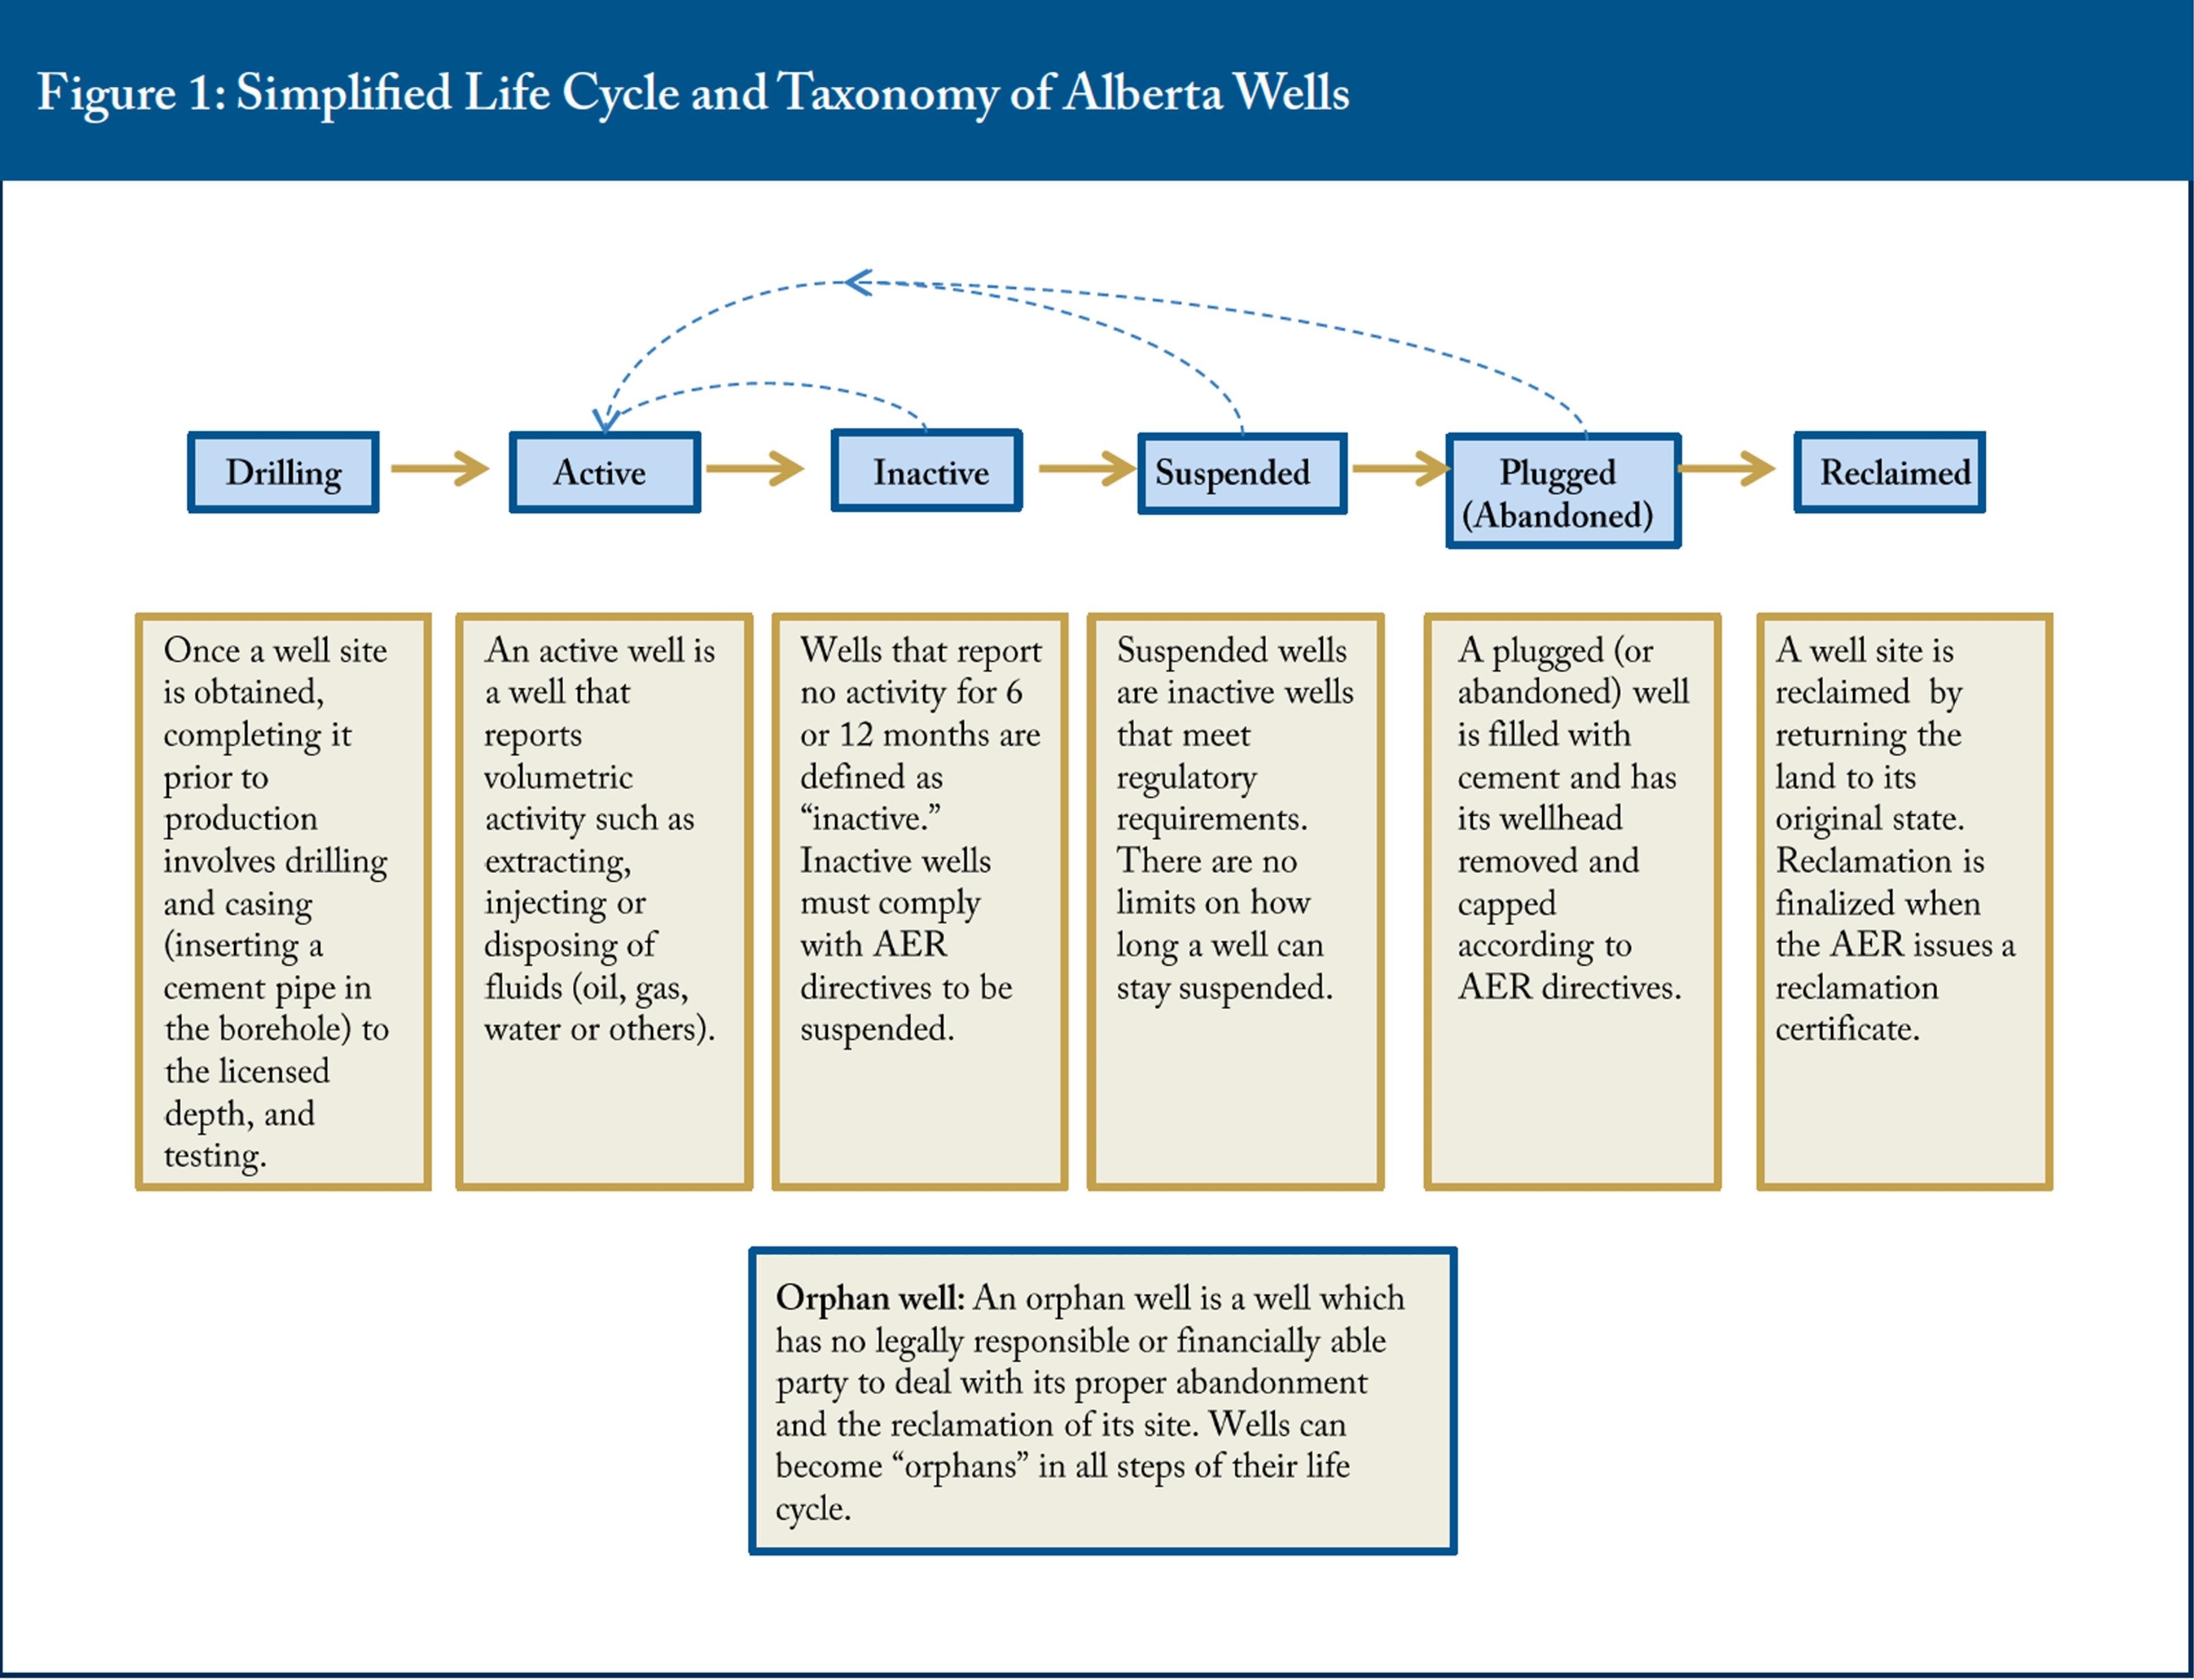 Figure 1: Simplified Life Cycle and Taxonomy of Alberta Wells